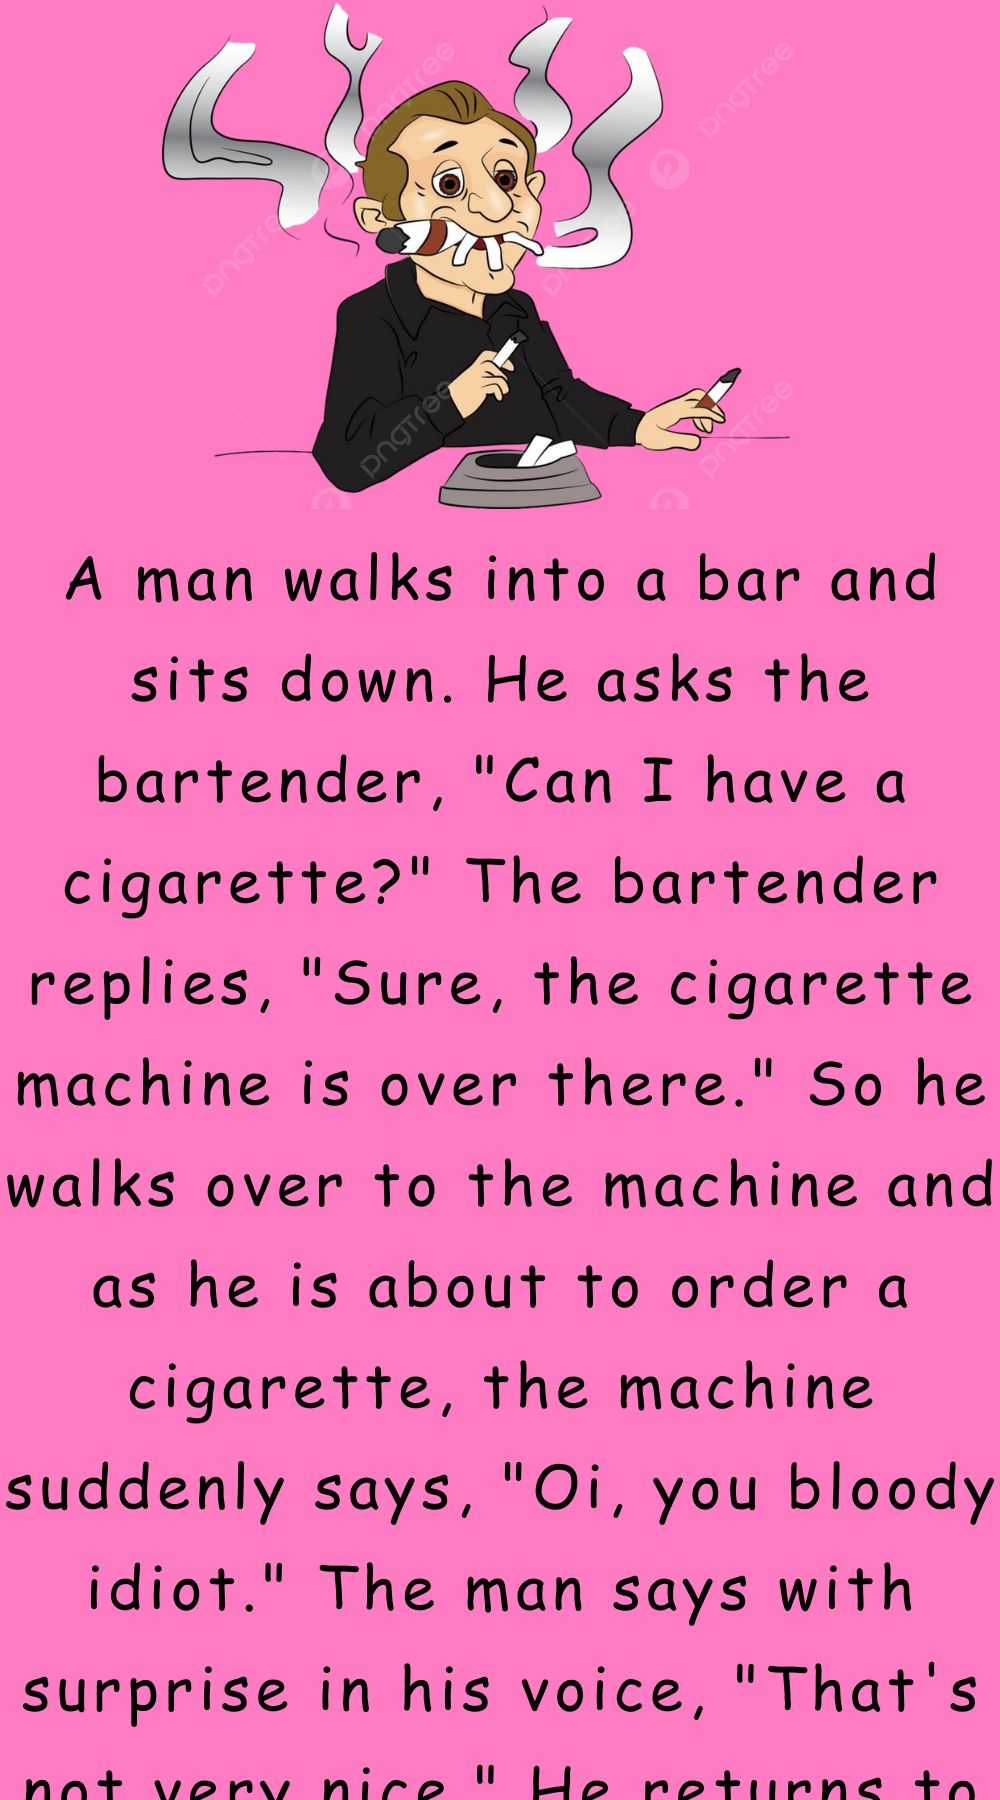 A man walks into a bar and sits down